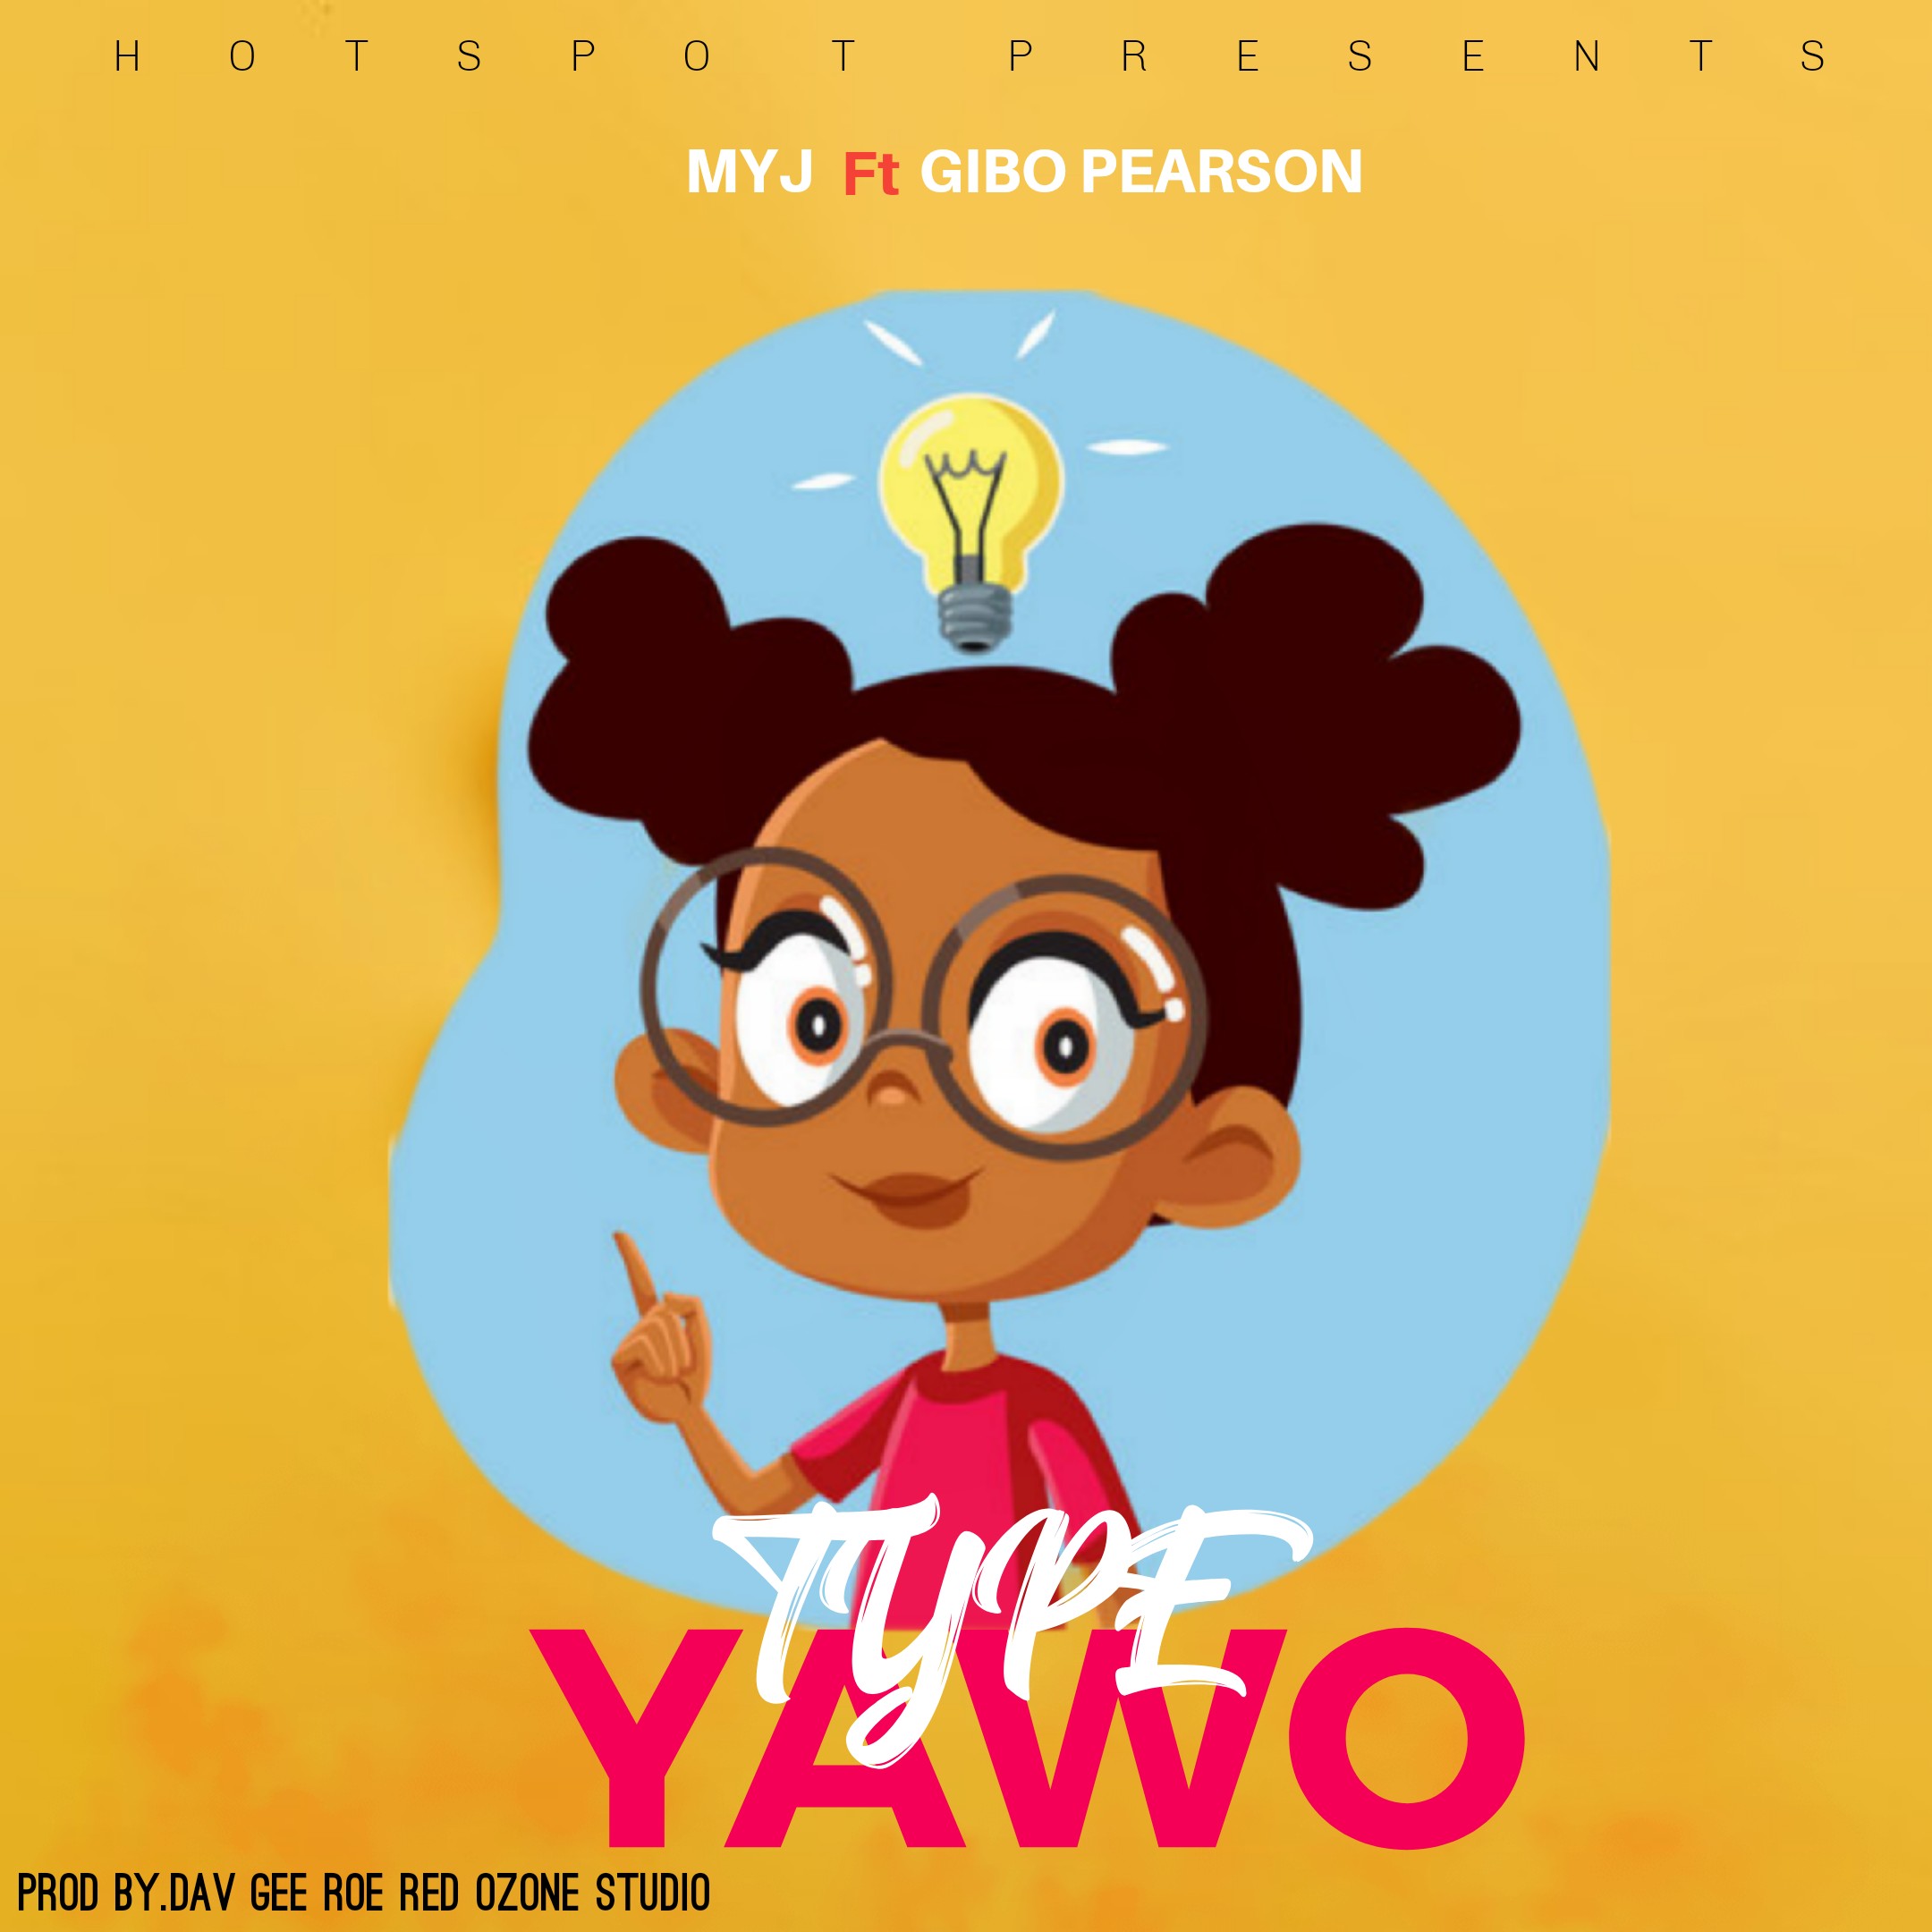 MYJ-ft-Giboh-Pearson-Type-yawo-Prod-by-Dav-Gee-Roe